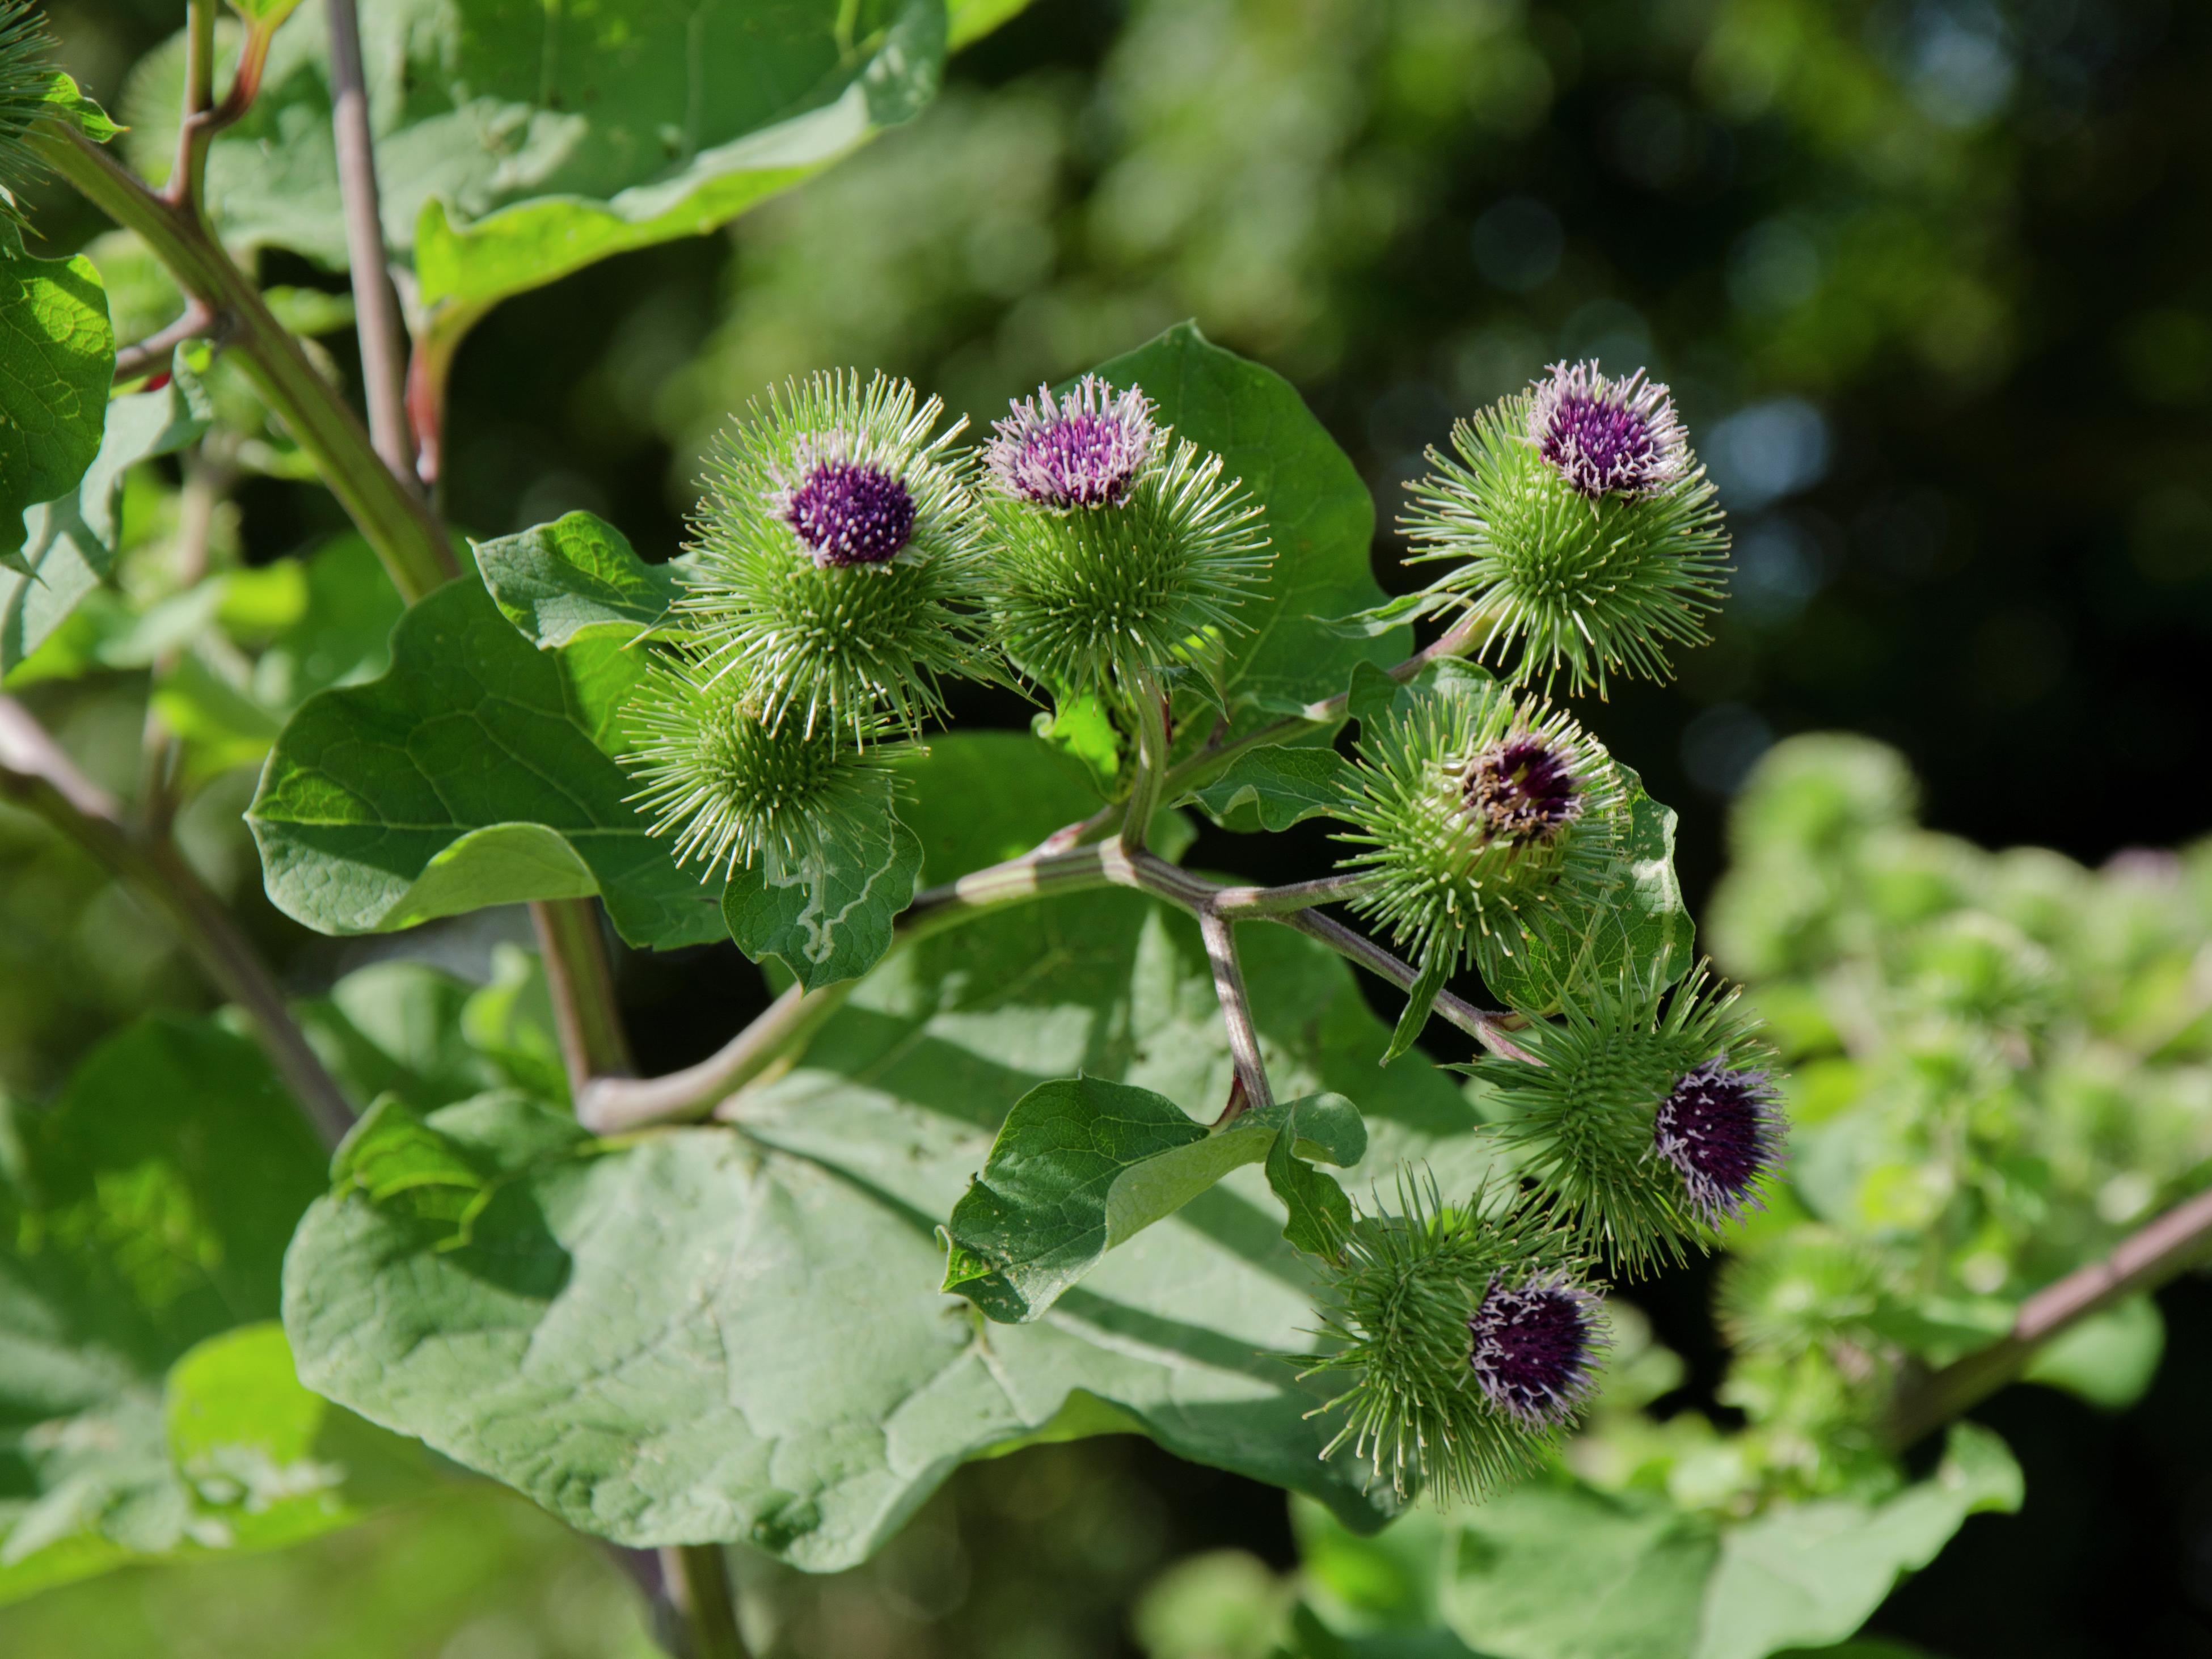 Image of Burdock leaves drying in the sun